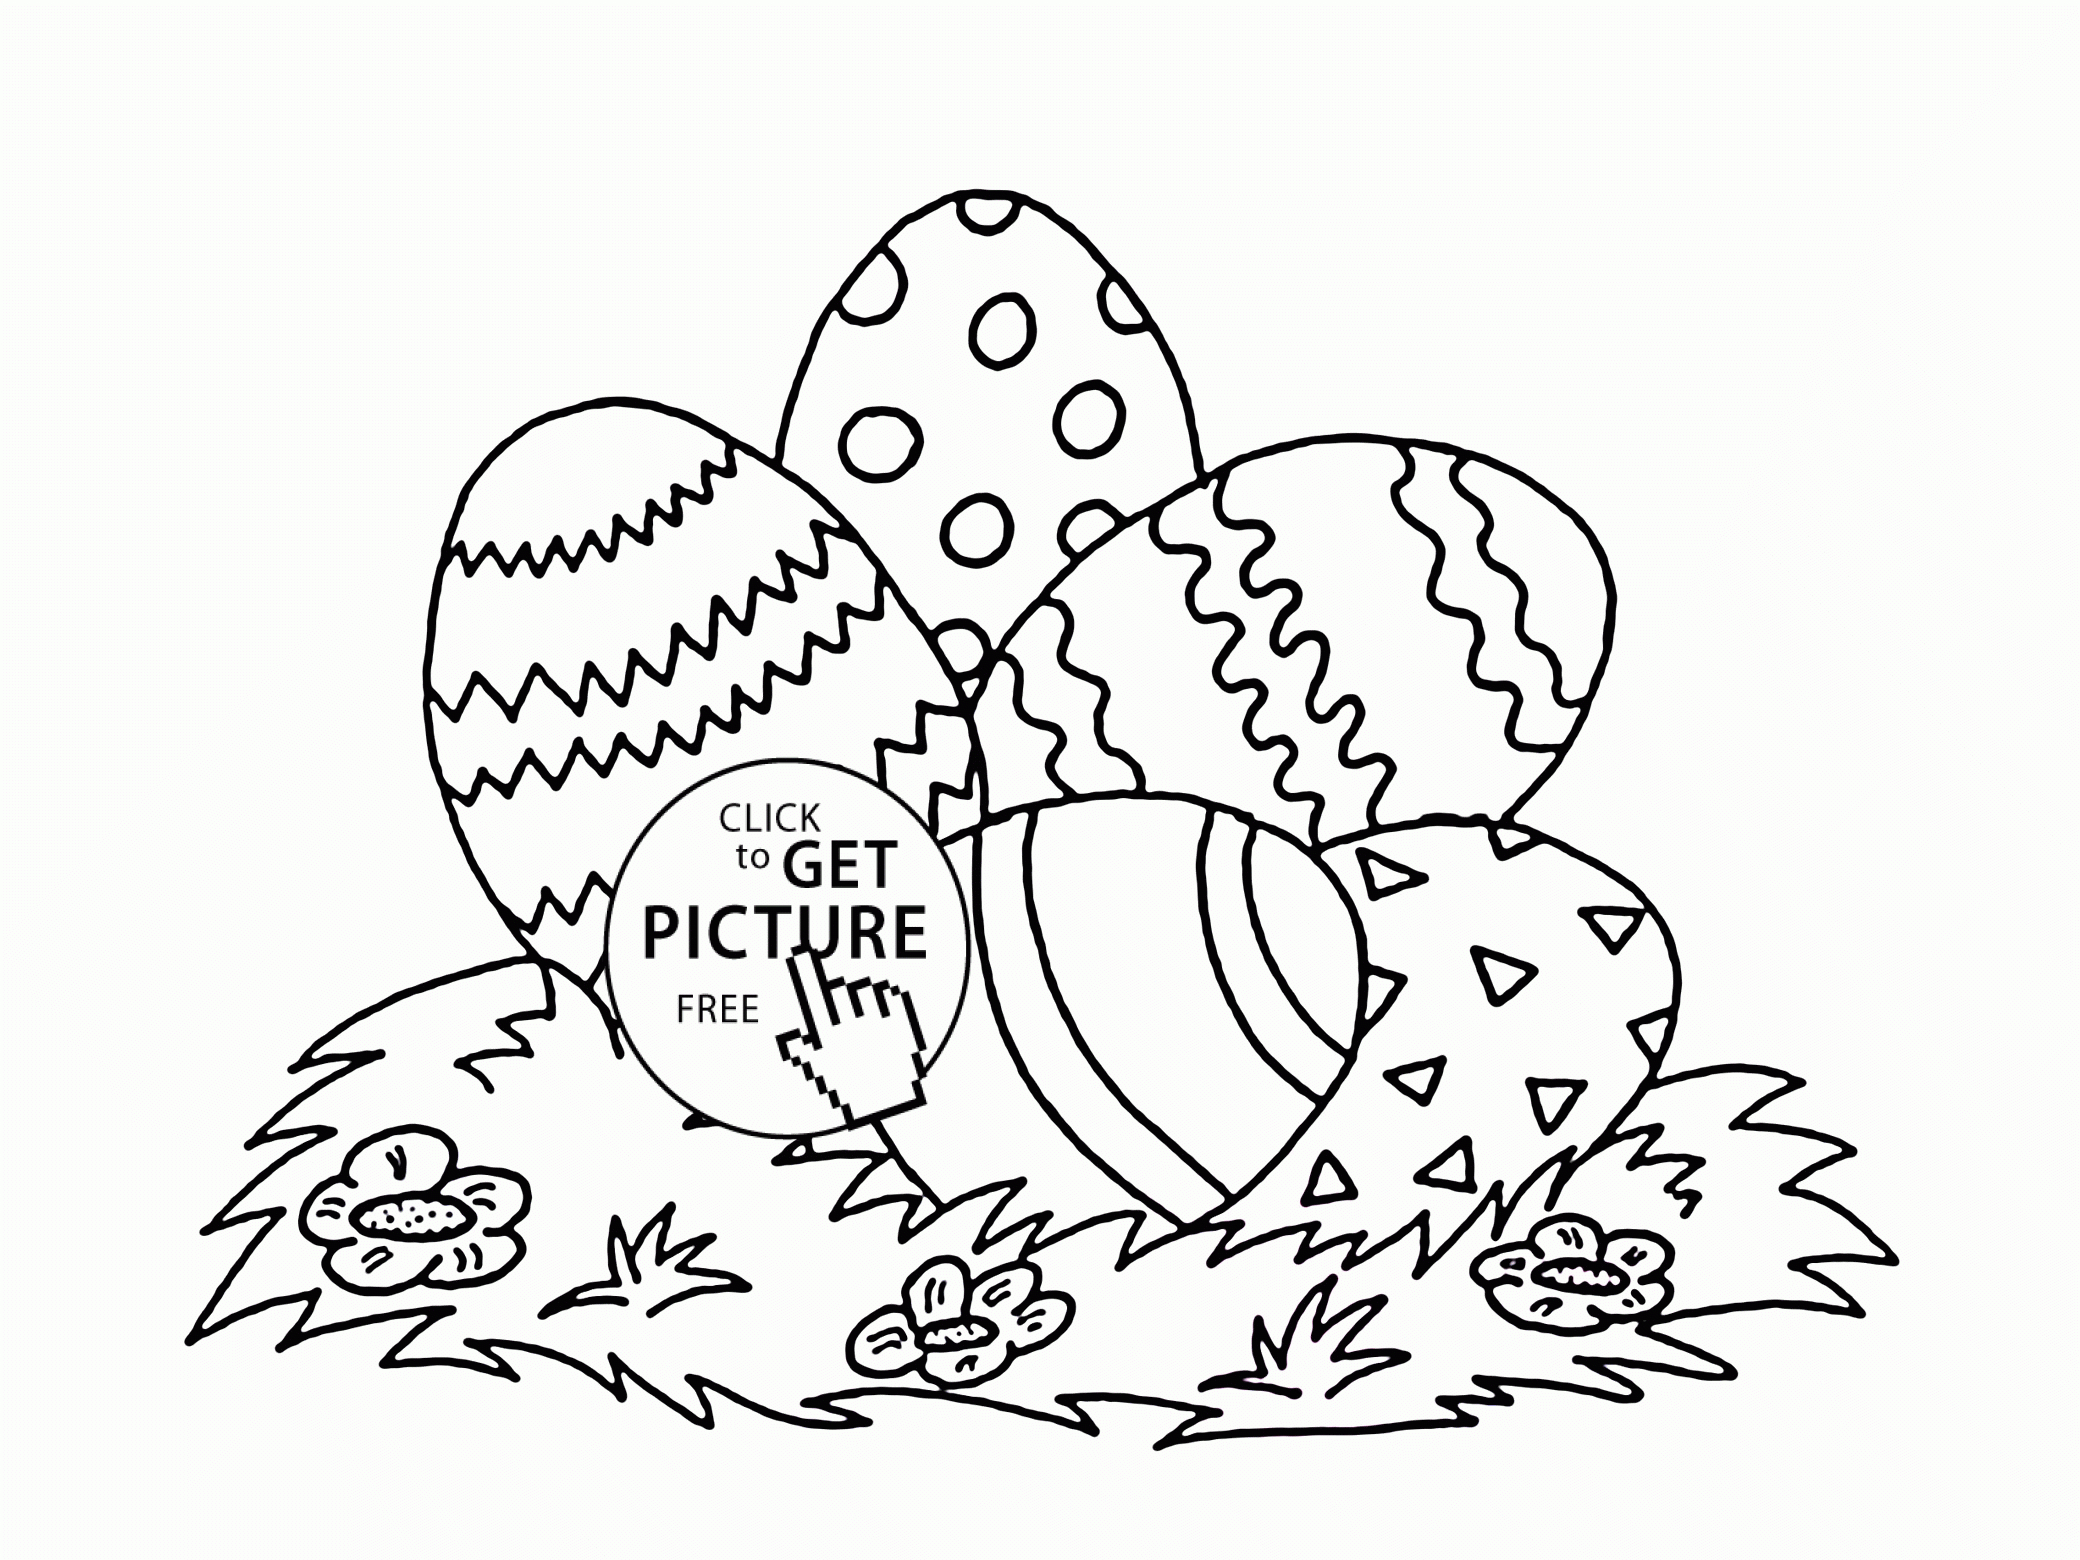 Coloring Pages : Free Easter Coloring Pages To Print Out For - Free - Free Printable Easter Pages